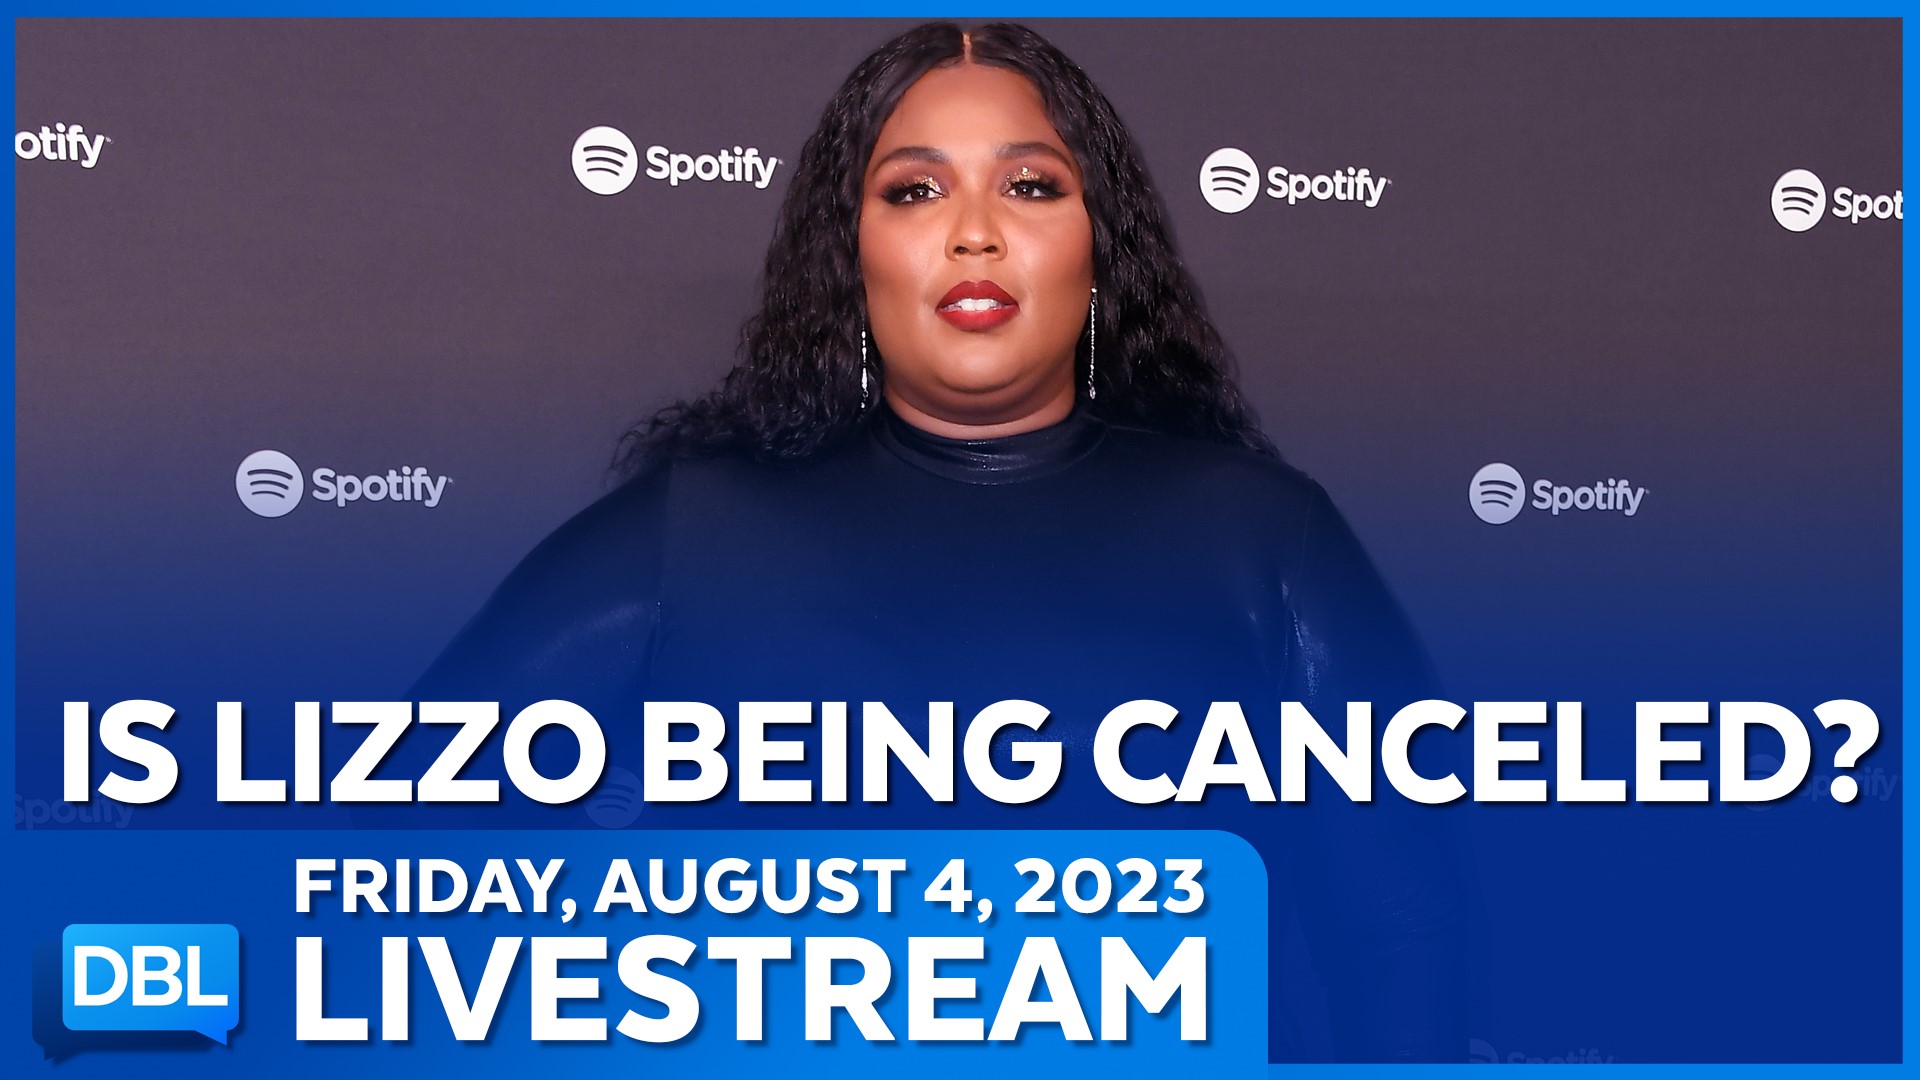 Lizzo is losing followers. Is she being canceled? Americans have high interest in weight loss drugs. Deborah Norville joins.